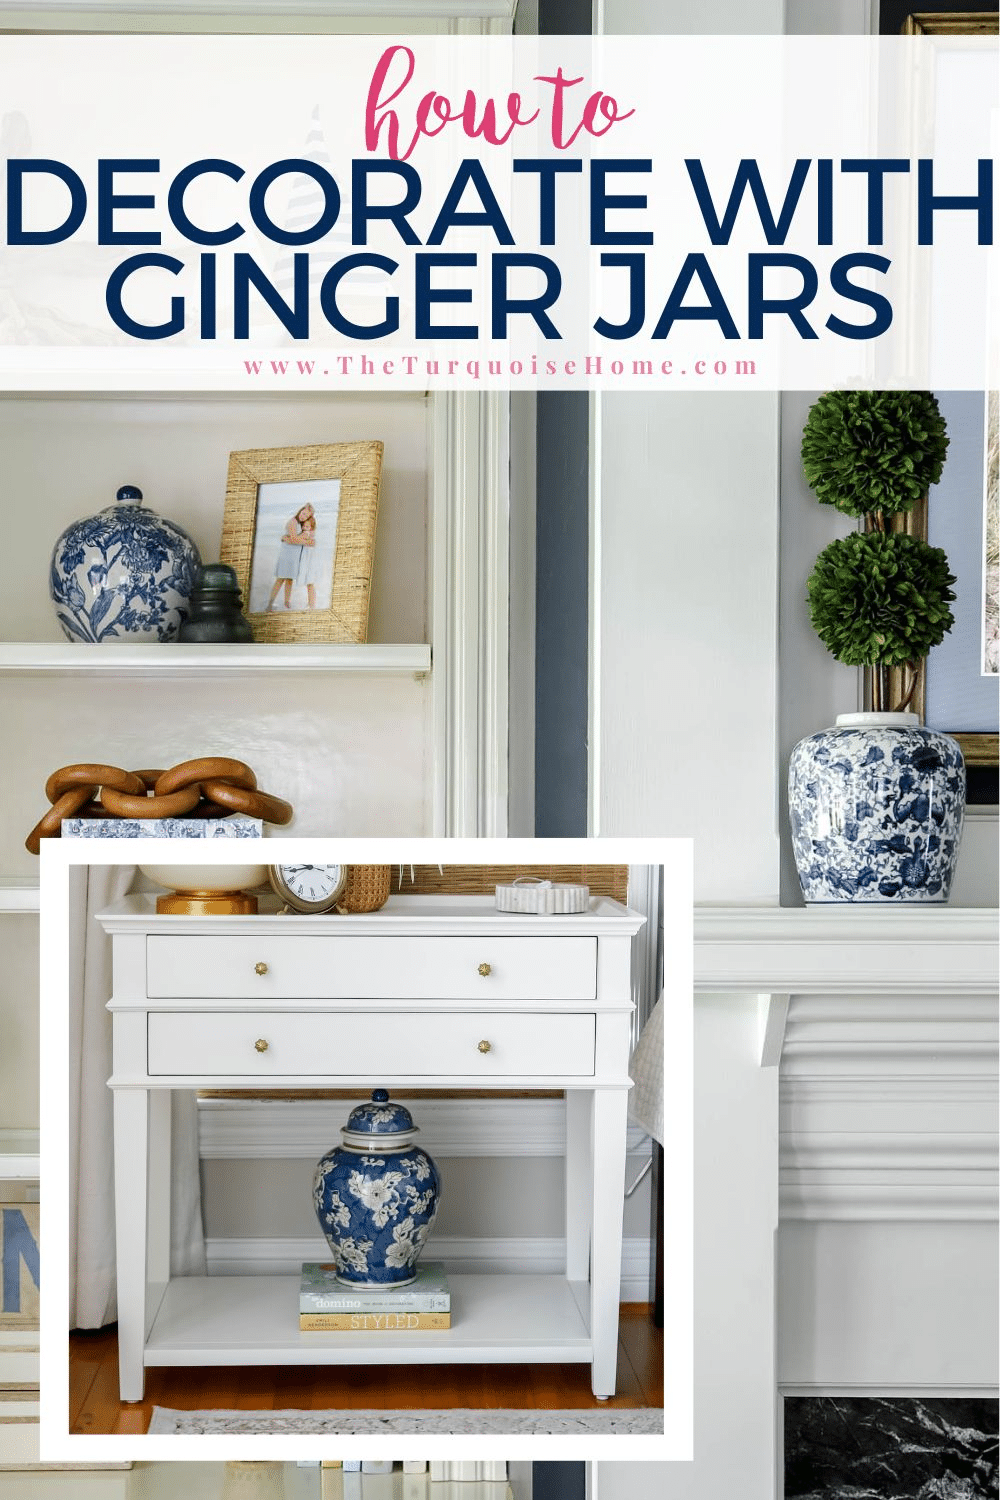 How to Decorate with Ginger Jars